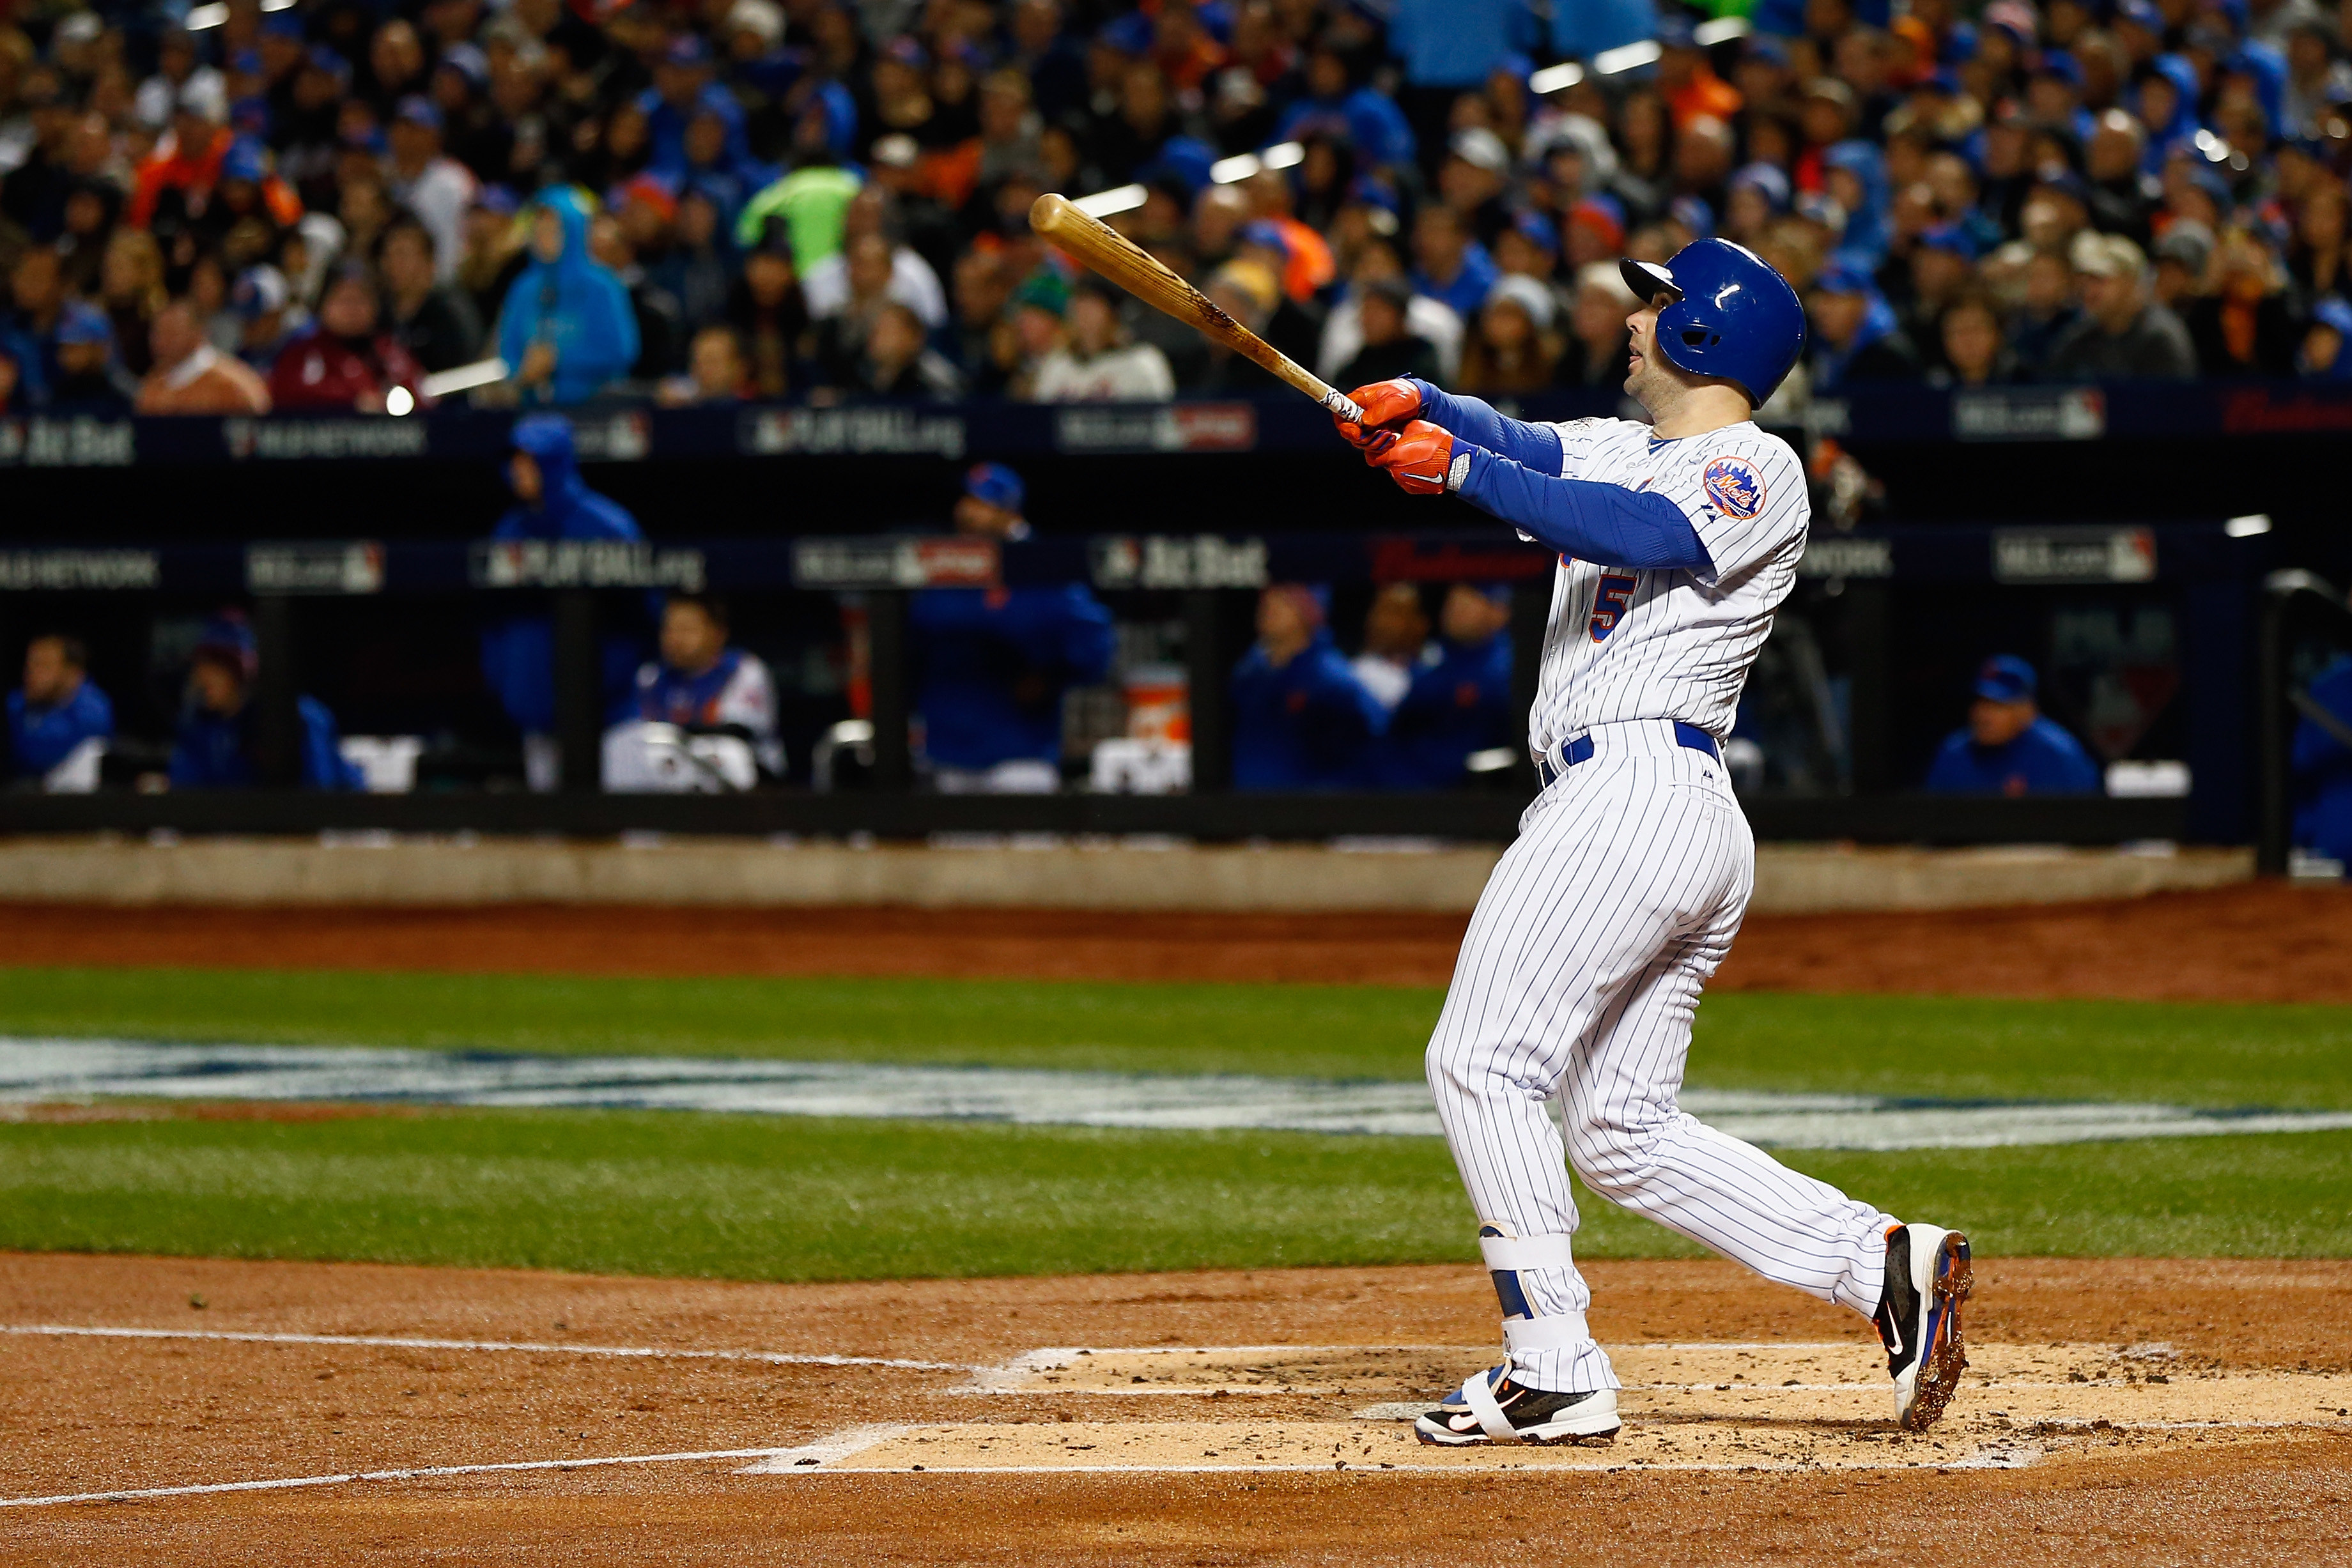 Royals vs. Mets Game 4 Live World Series Score and Highlights